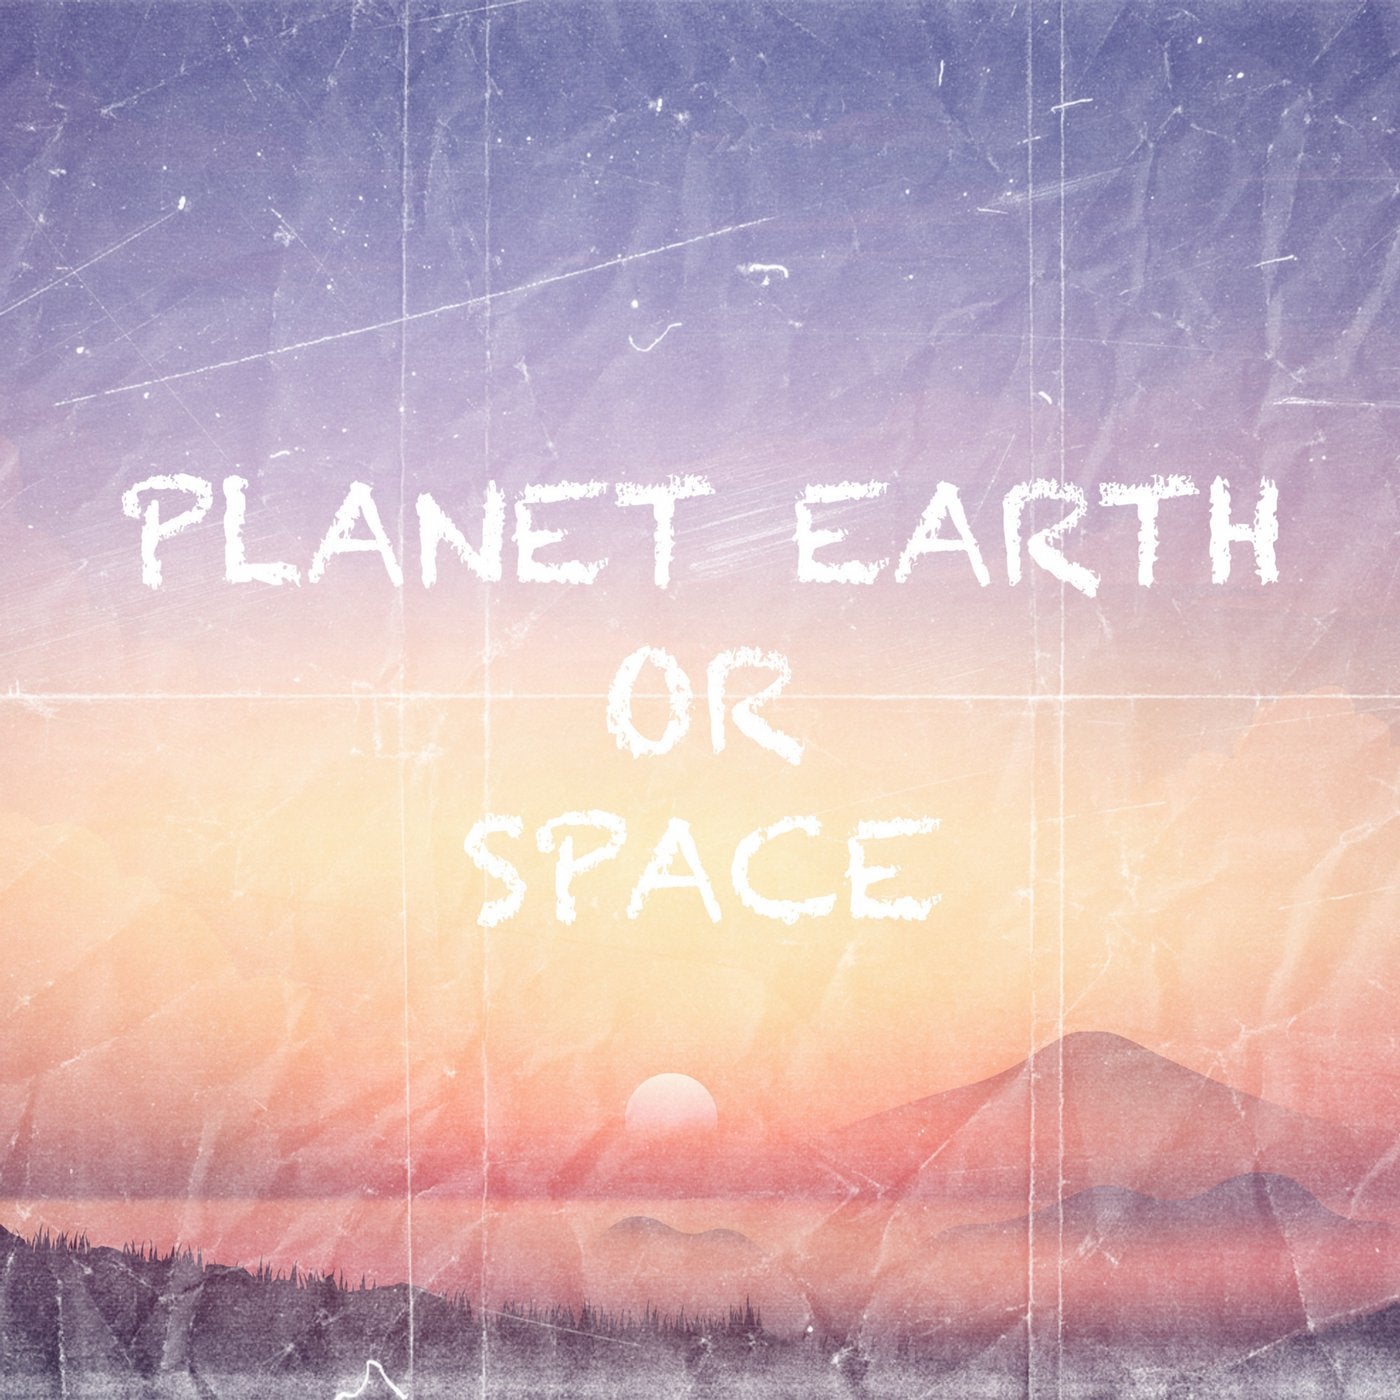 Planet Earth or Space